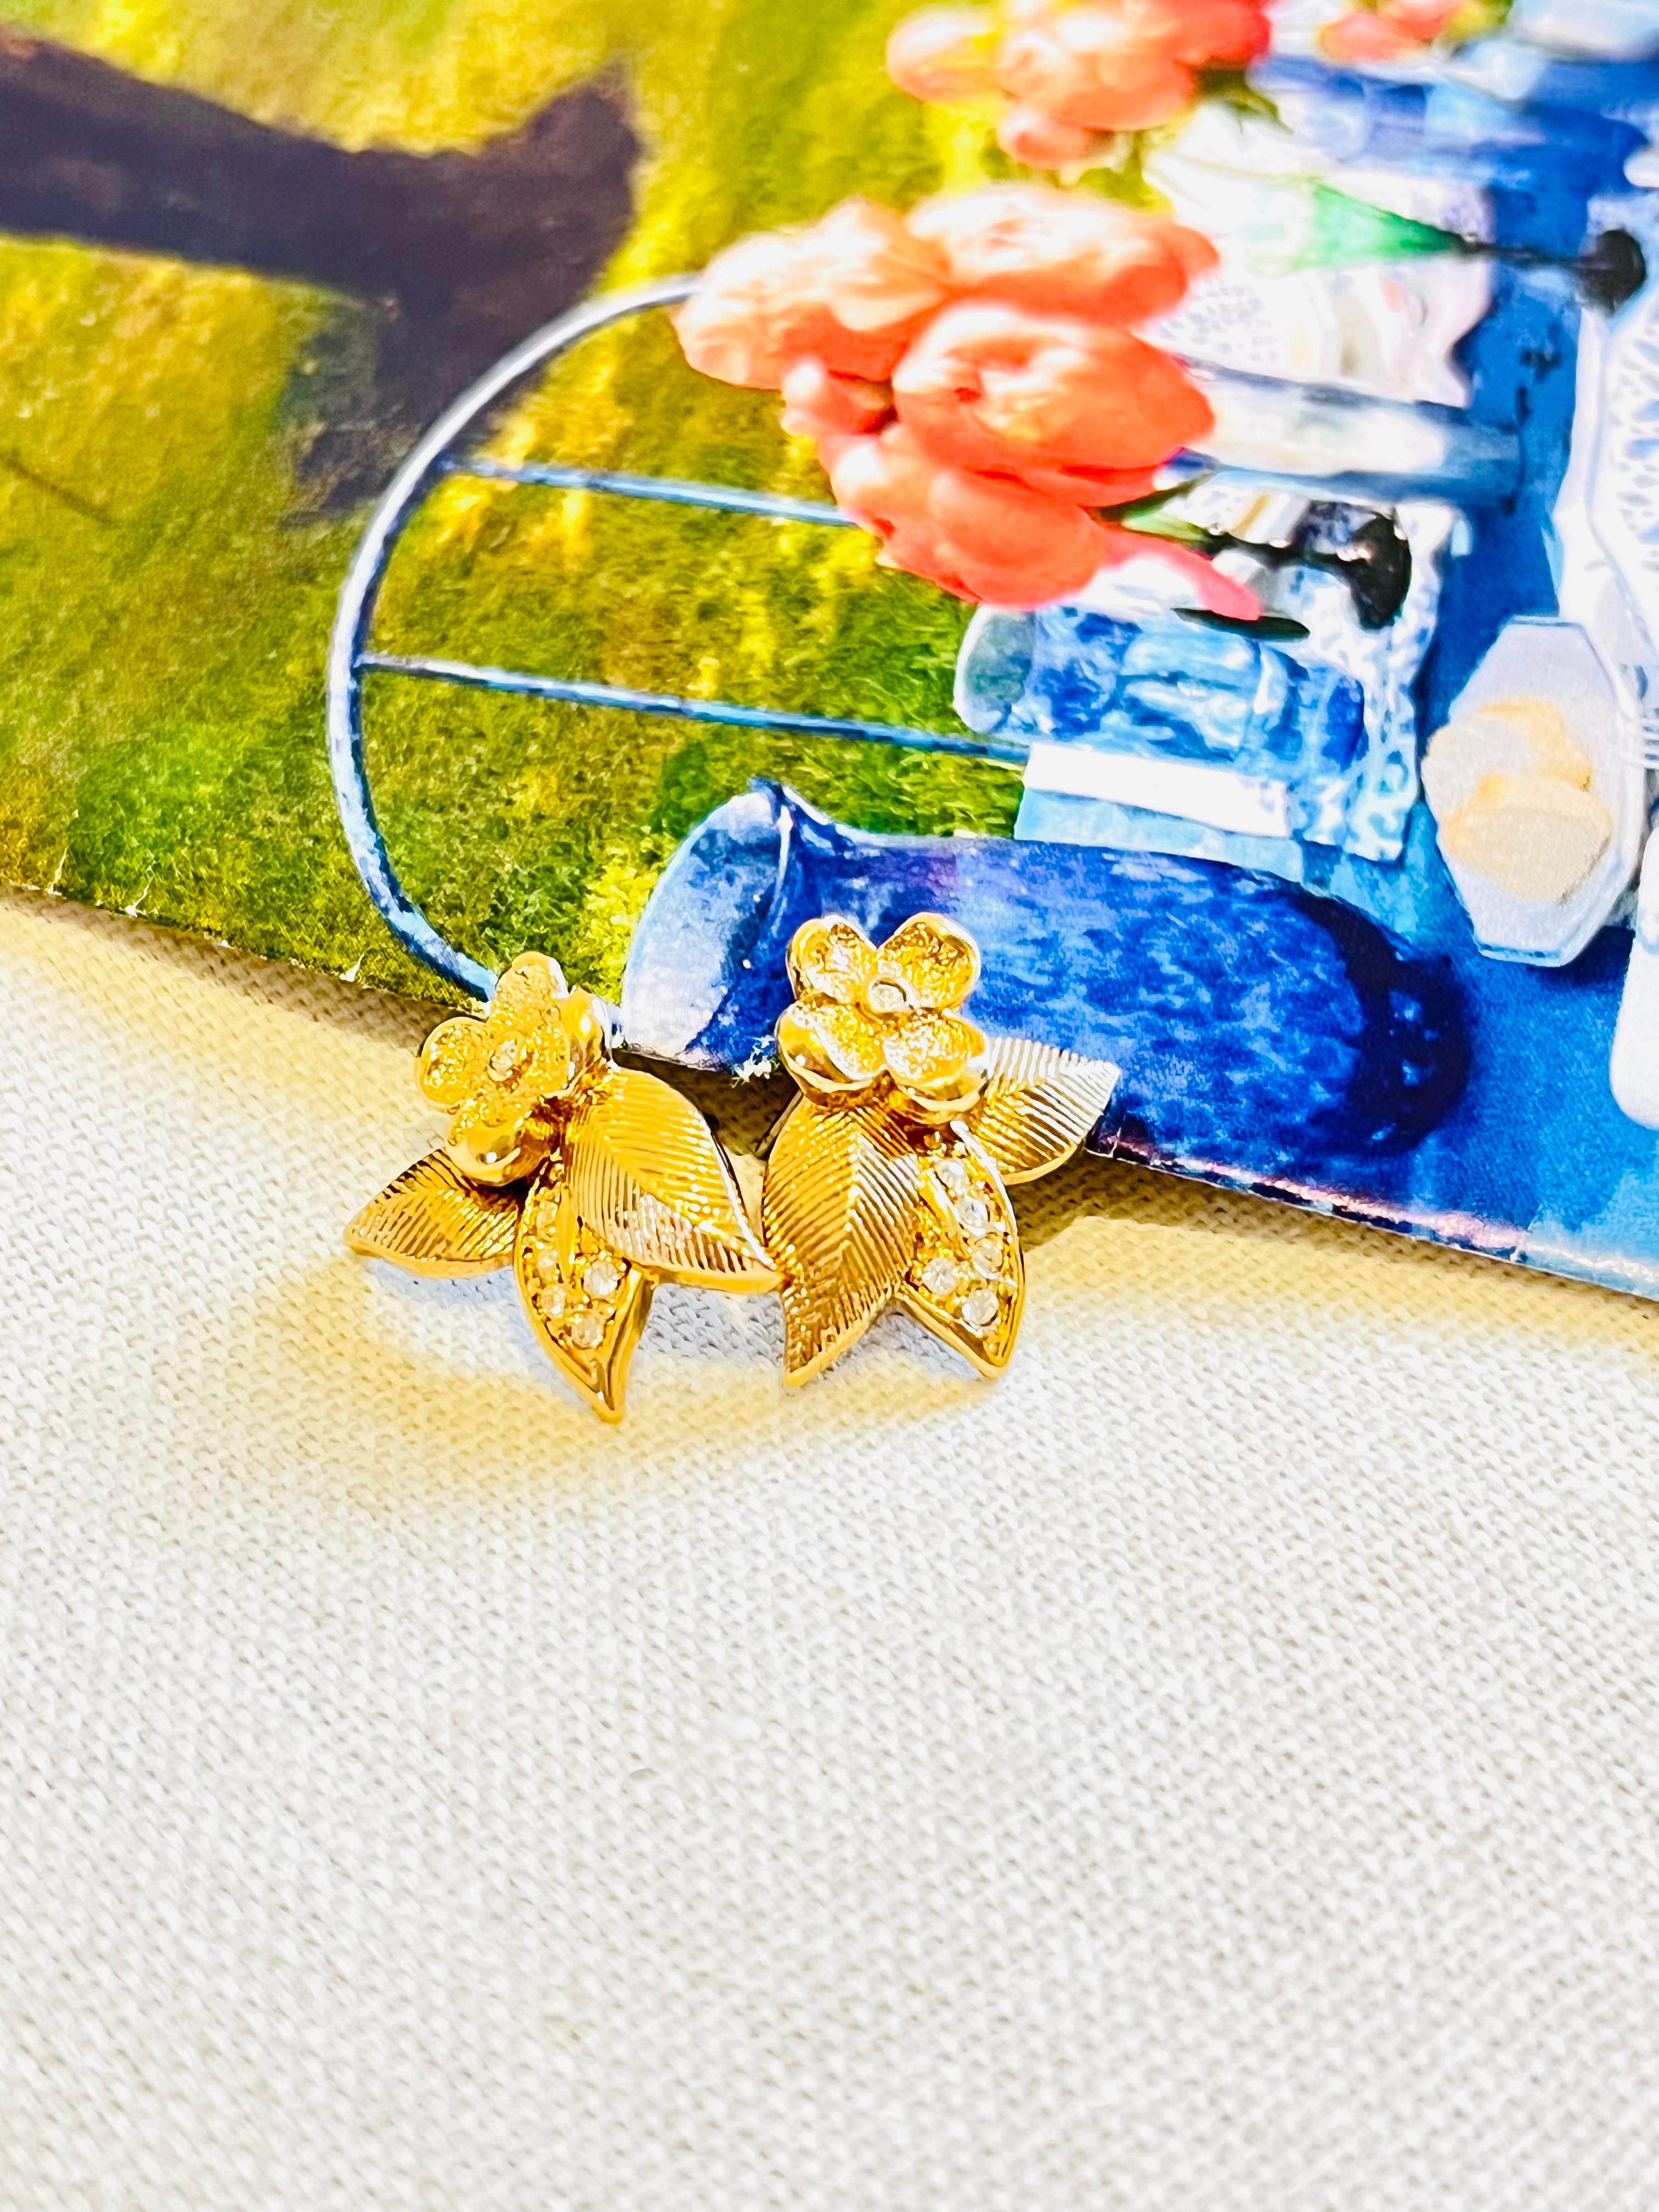 Very excellent condition. 100% Genuine.

A very beautiful pair of earrings by Chr. DIOR, signed at the back.

Size: 2.0*2.0 cm.

Weight: 3.0 g/each.

_ _ _

Great for everyday wear. Come with velvet pouch and beautiful package.

Makes the perfect